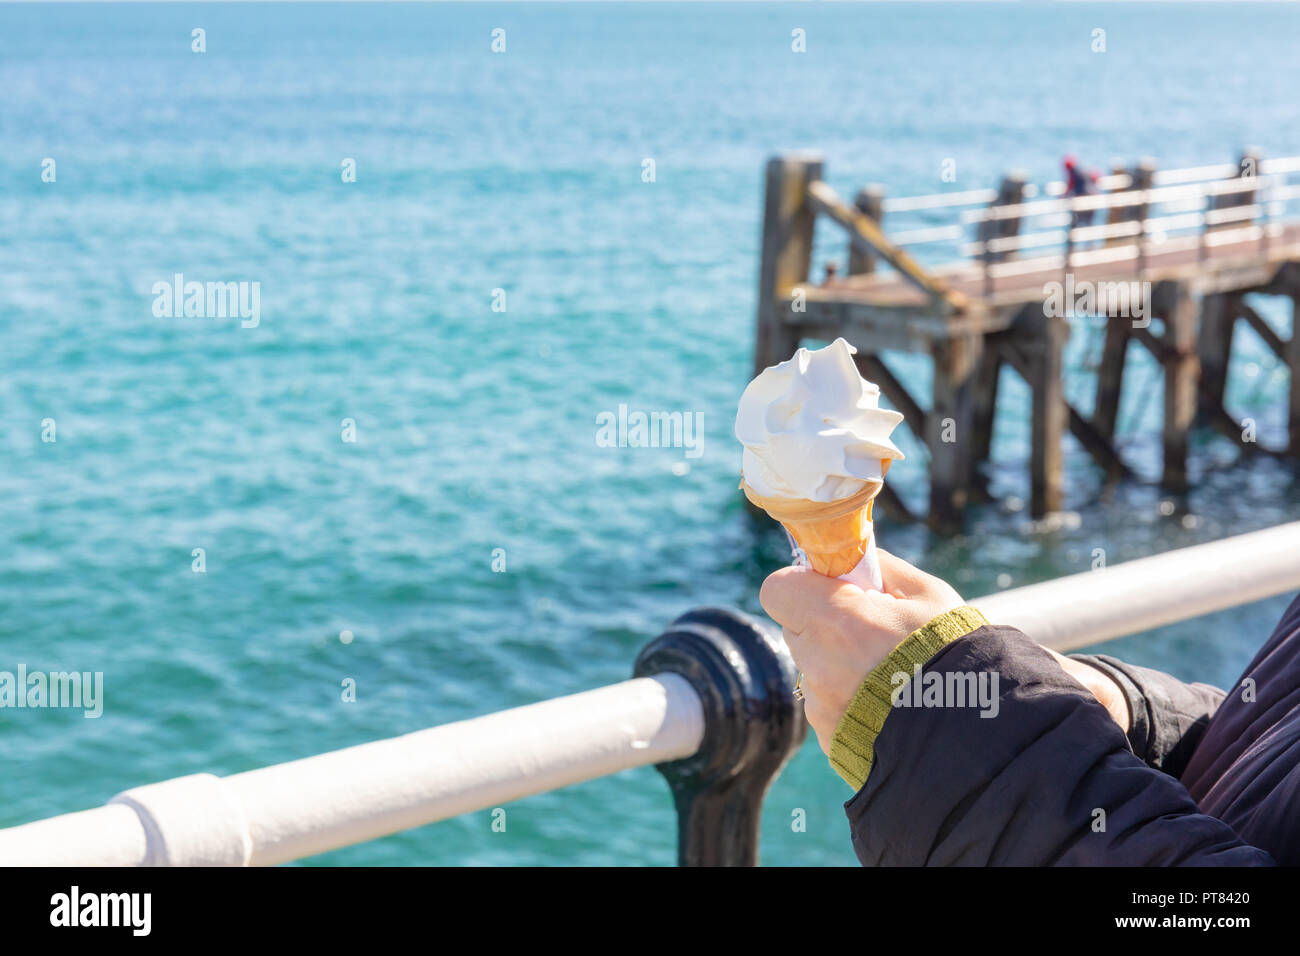 Womans Hands Holding an Ice Cream in a Cone With a Metal Rail and the Sea Beyond Stock Photo